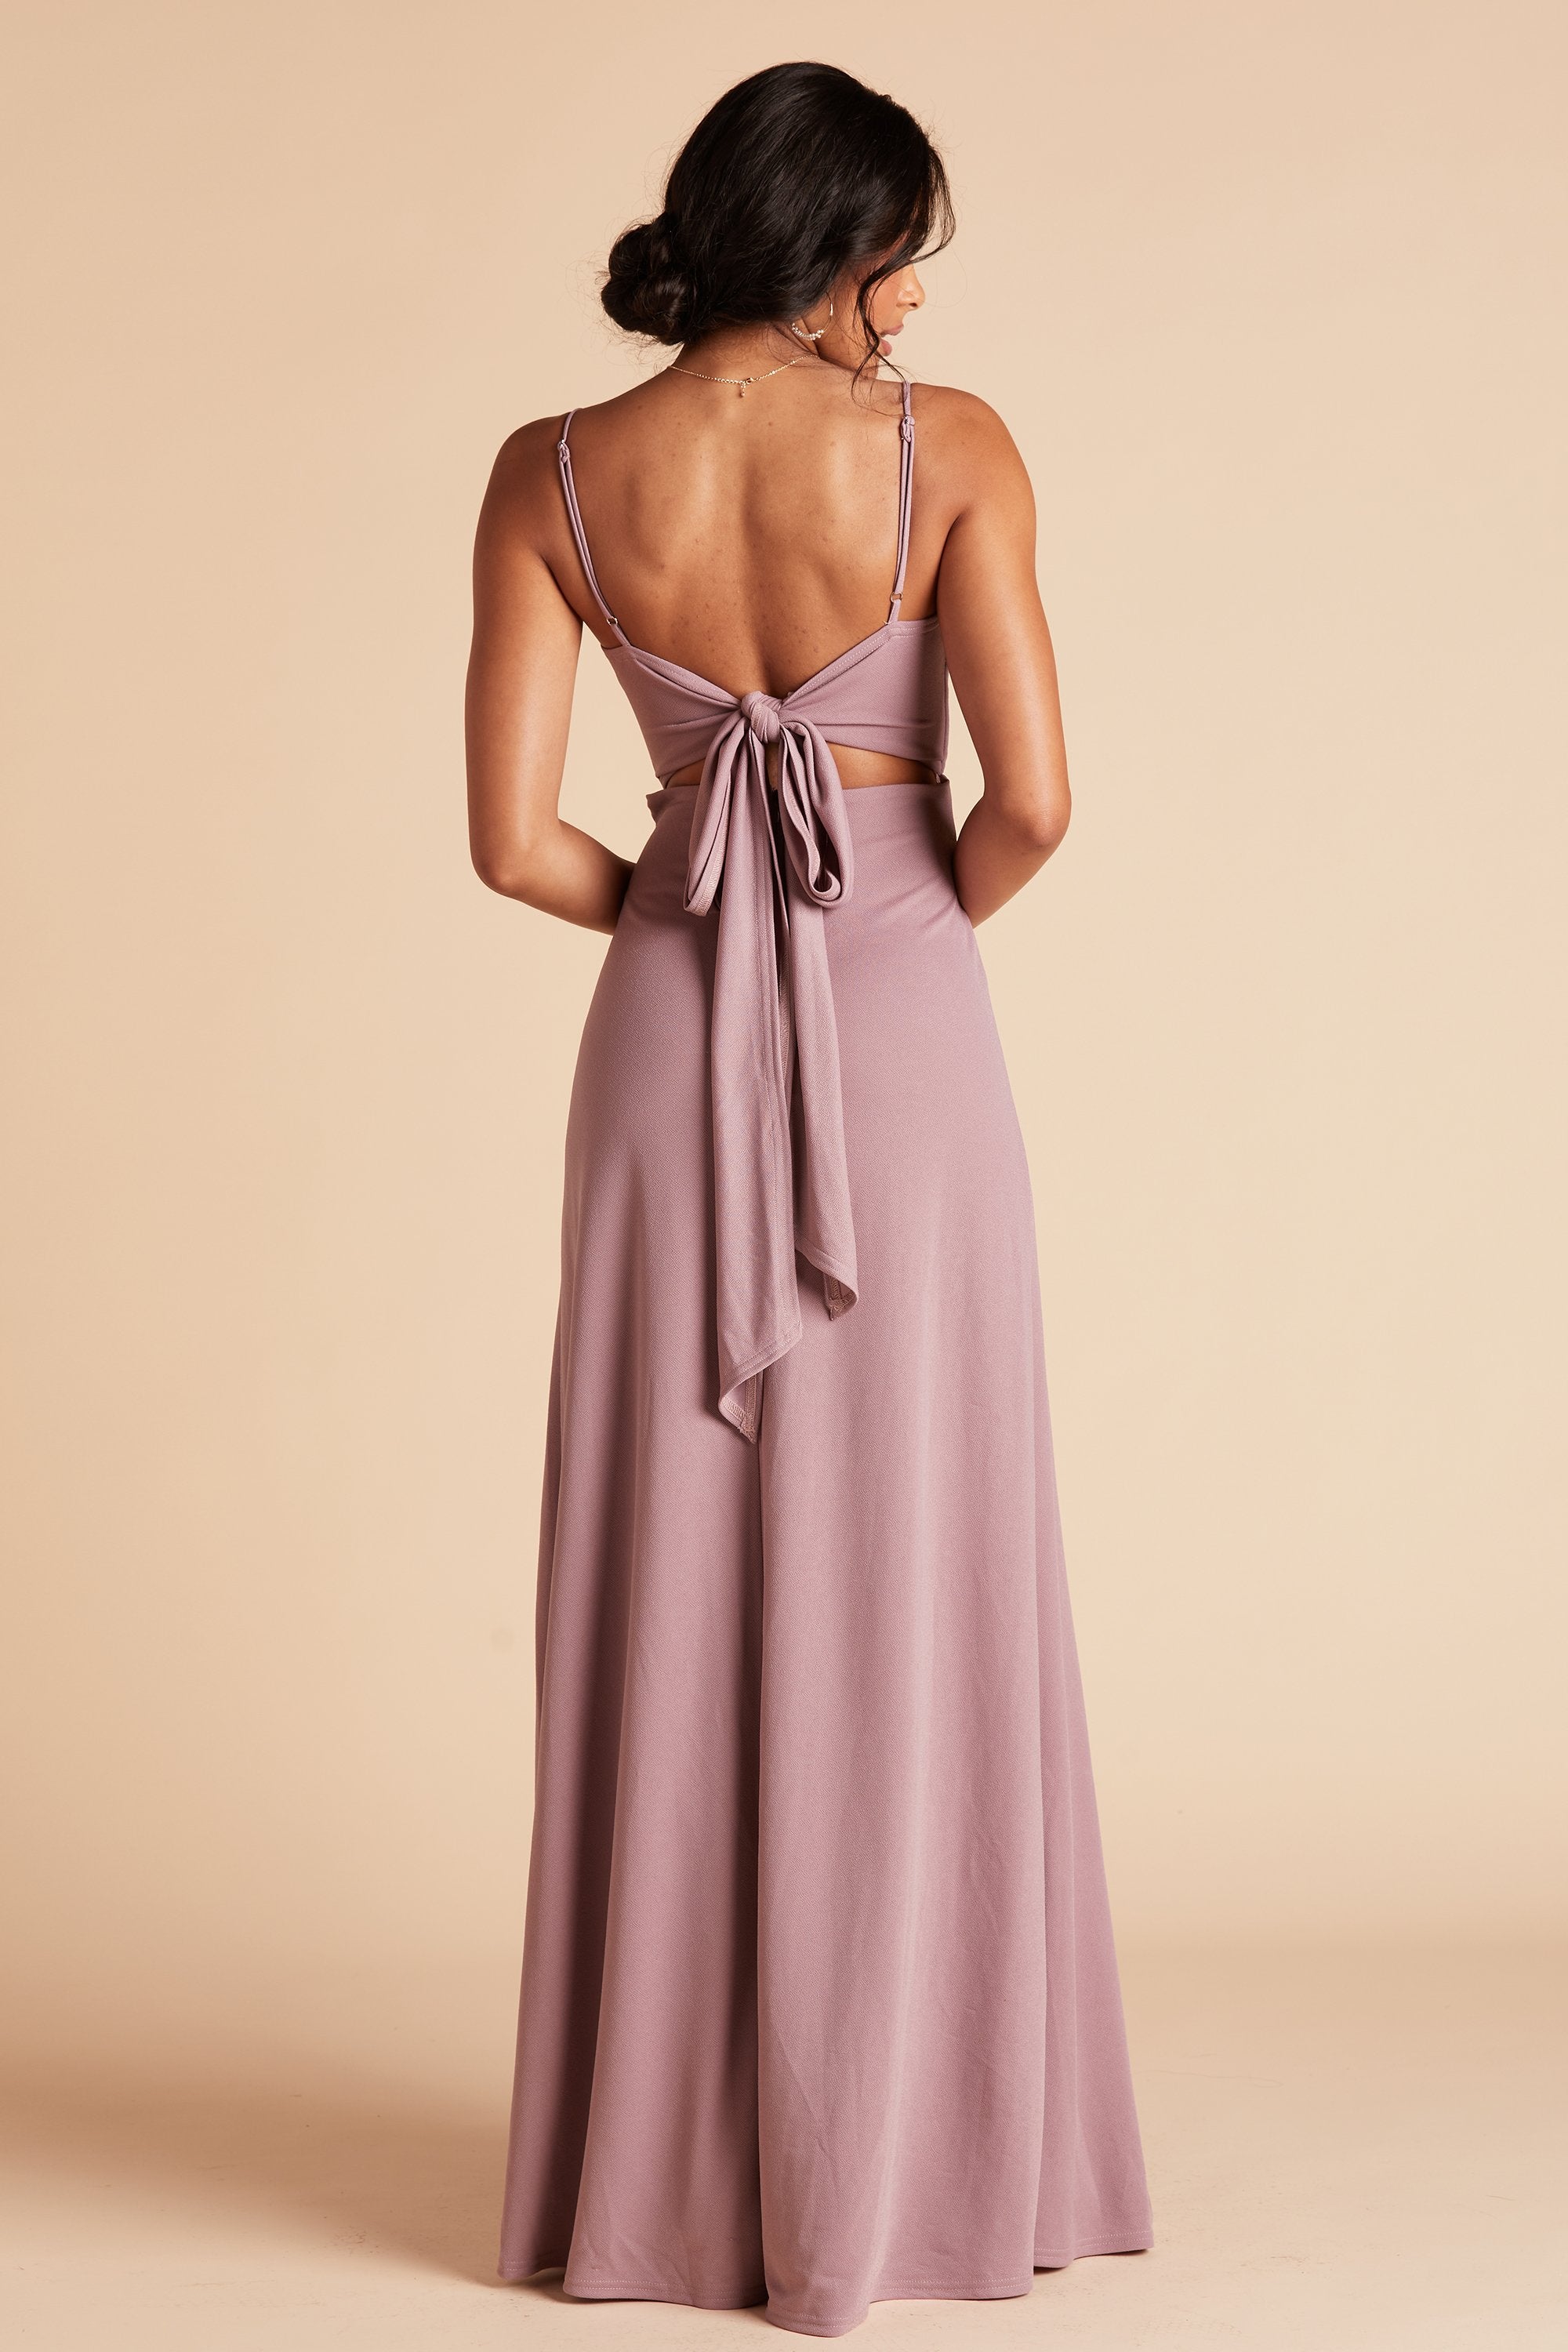 Benny bridesmaid dress in dark mauve crepe by Birdy Grey, back view